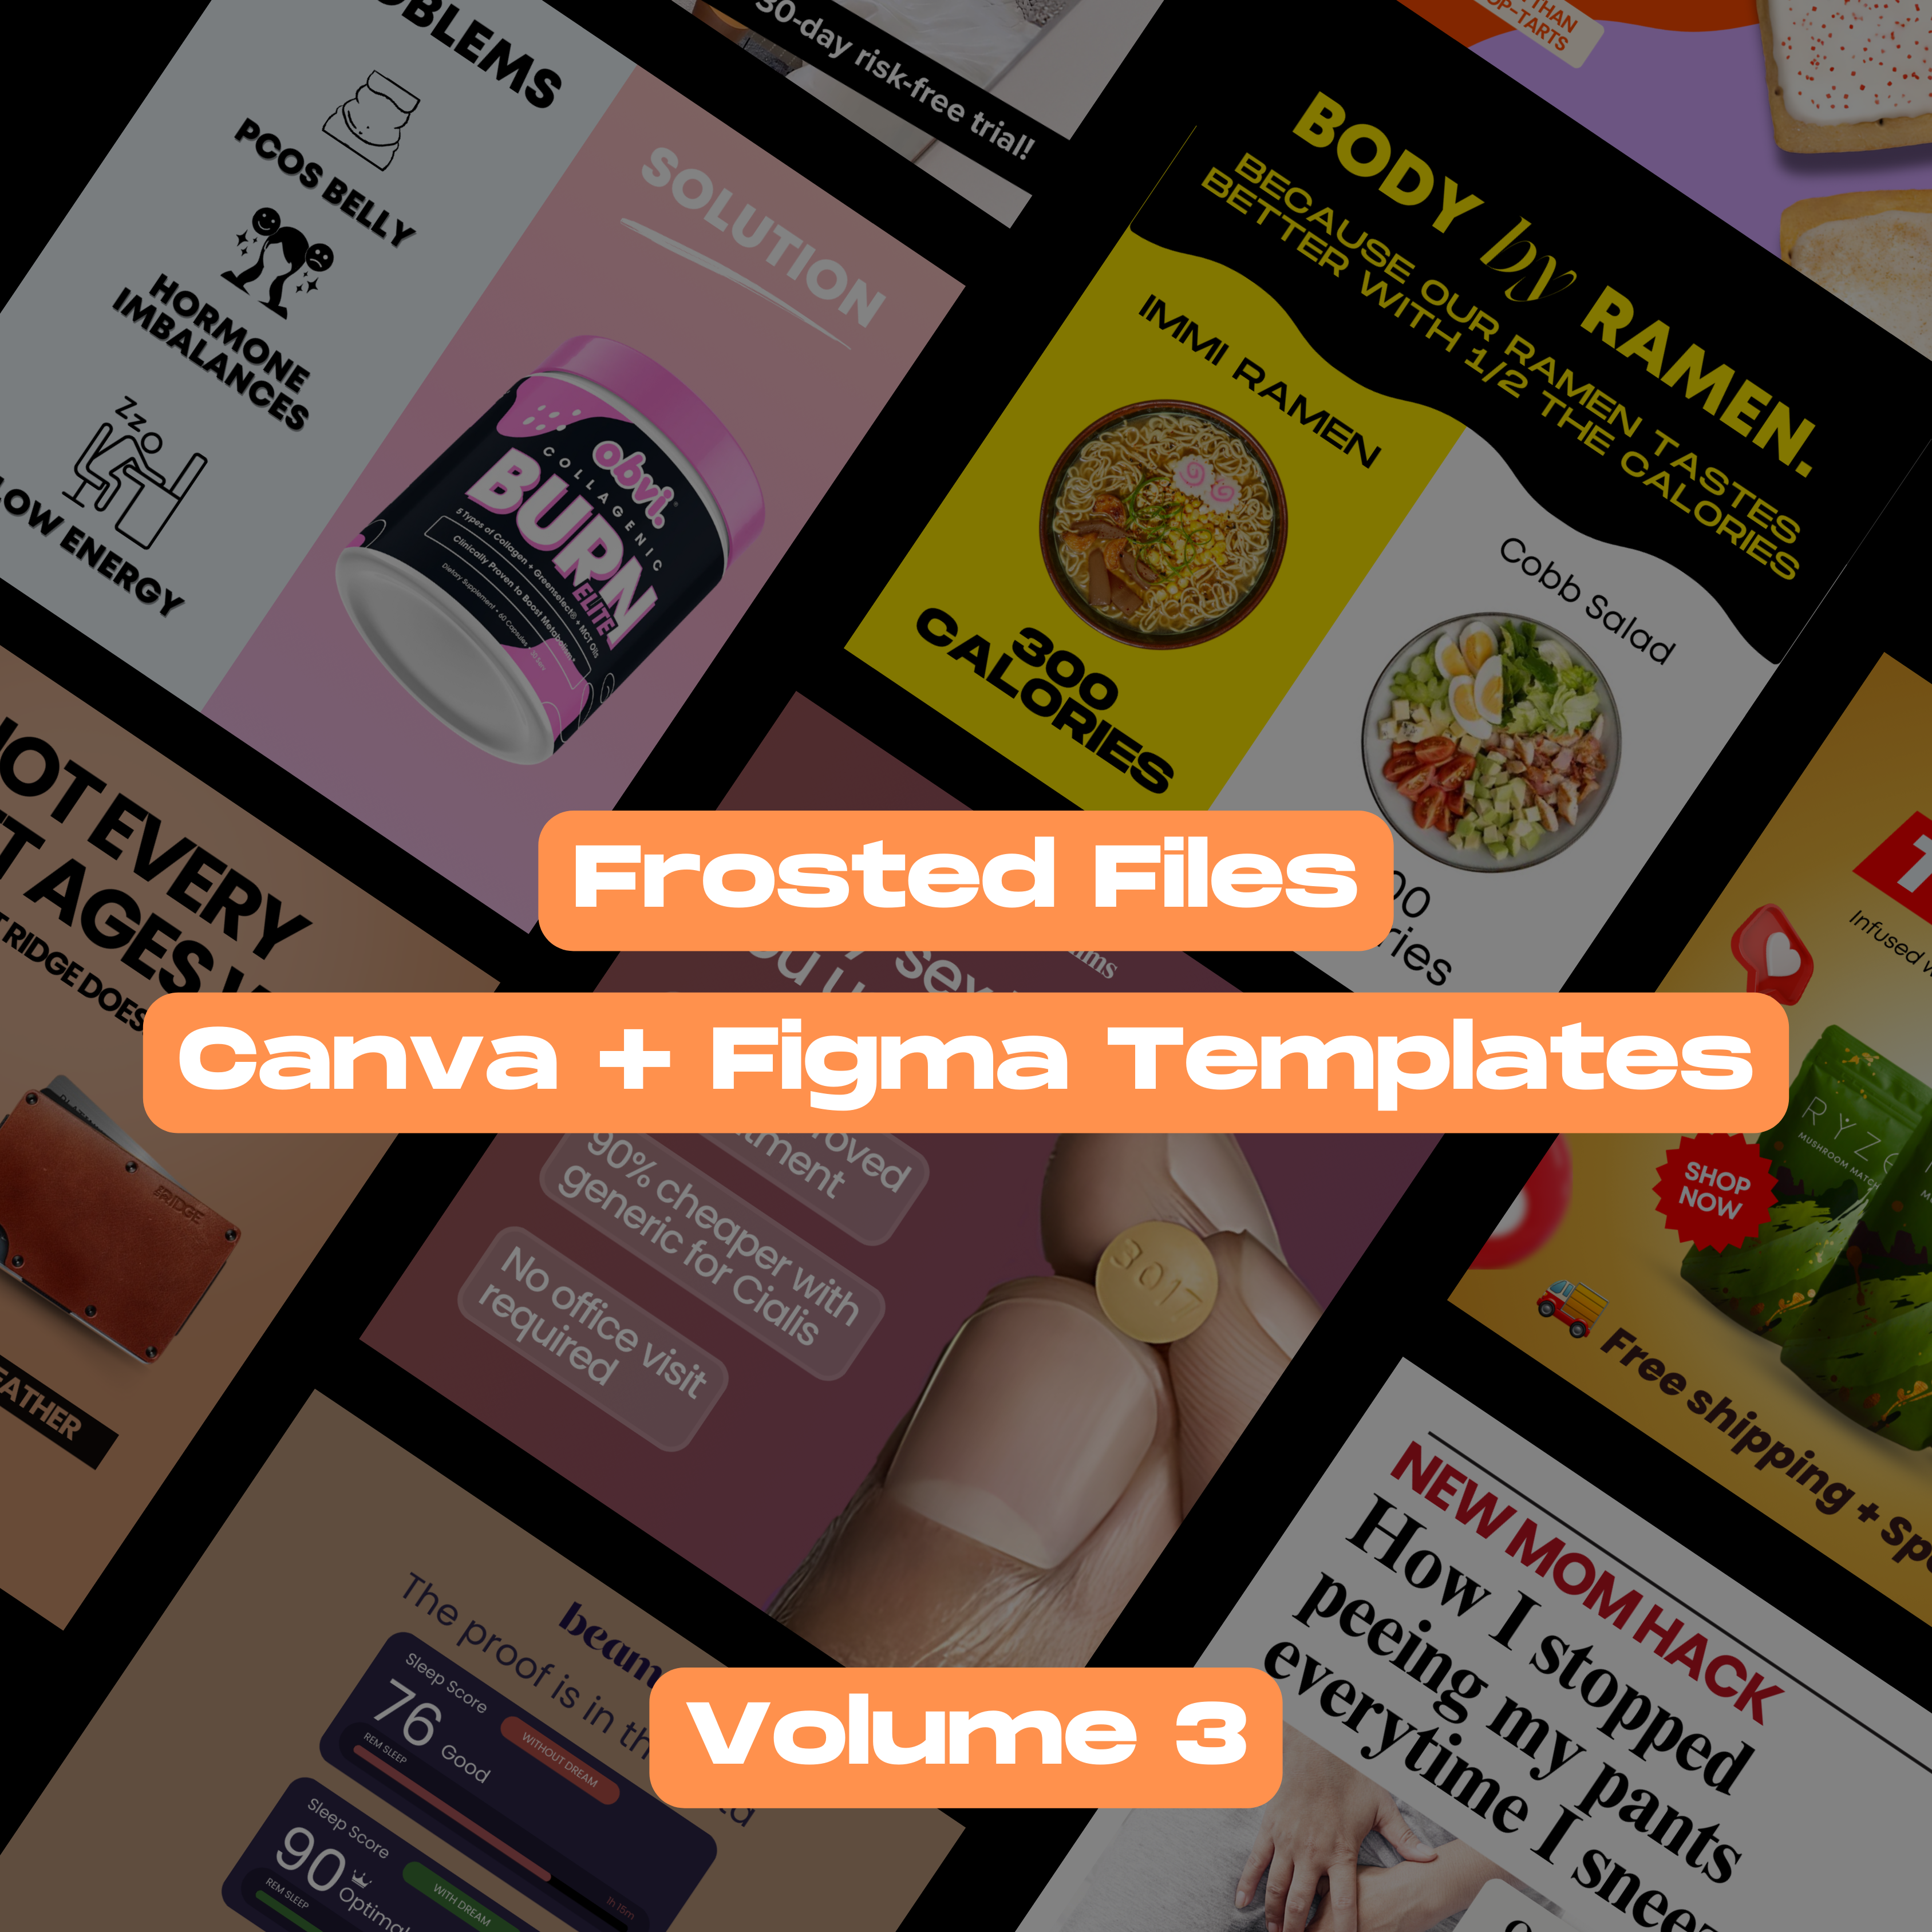 Collage of colorful social media templates with text 'Frosted Files Canva + Figma Templates Volume 3'.